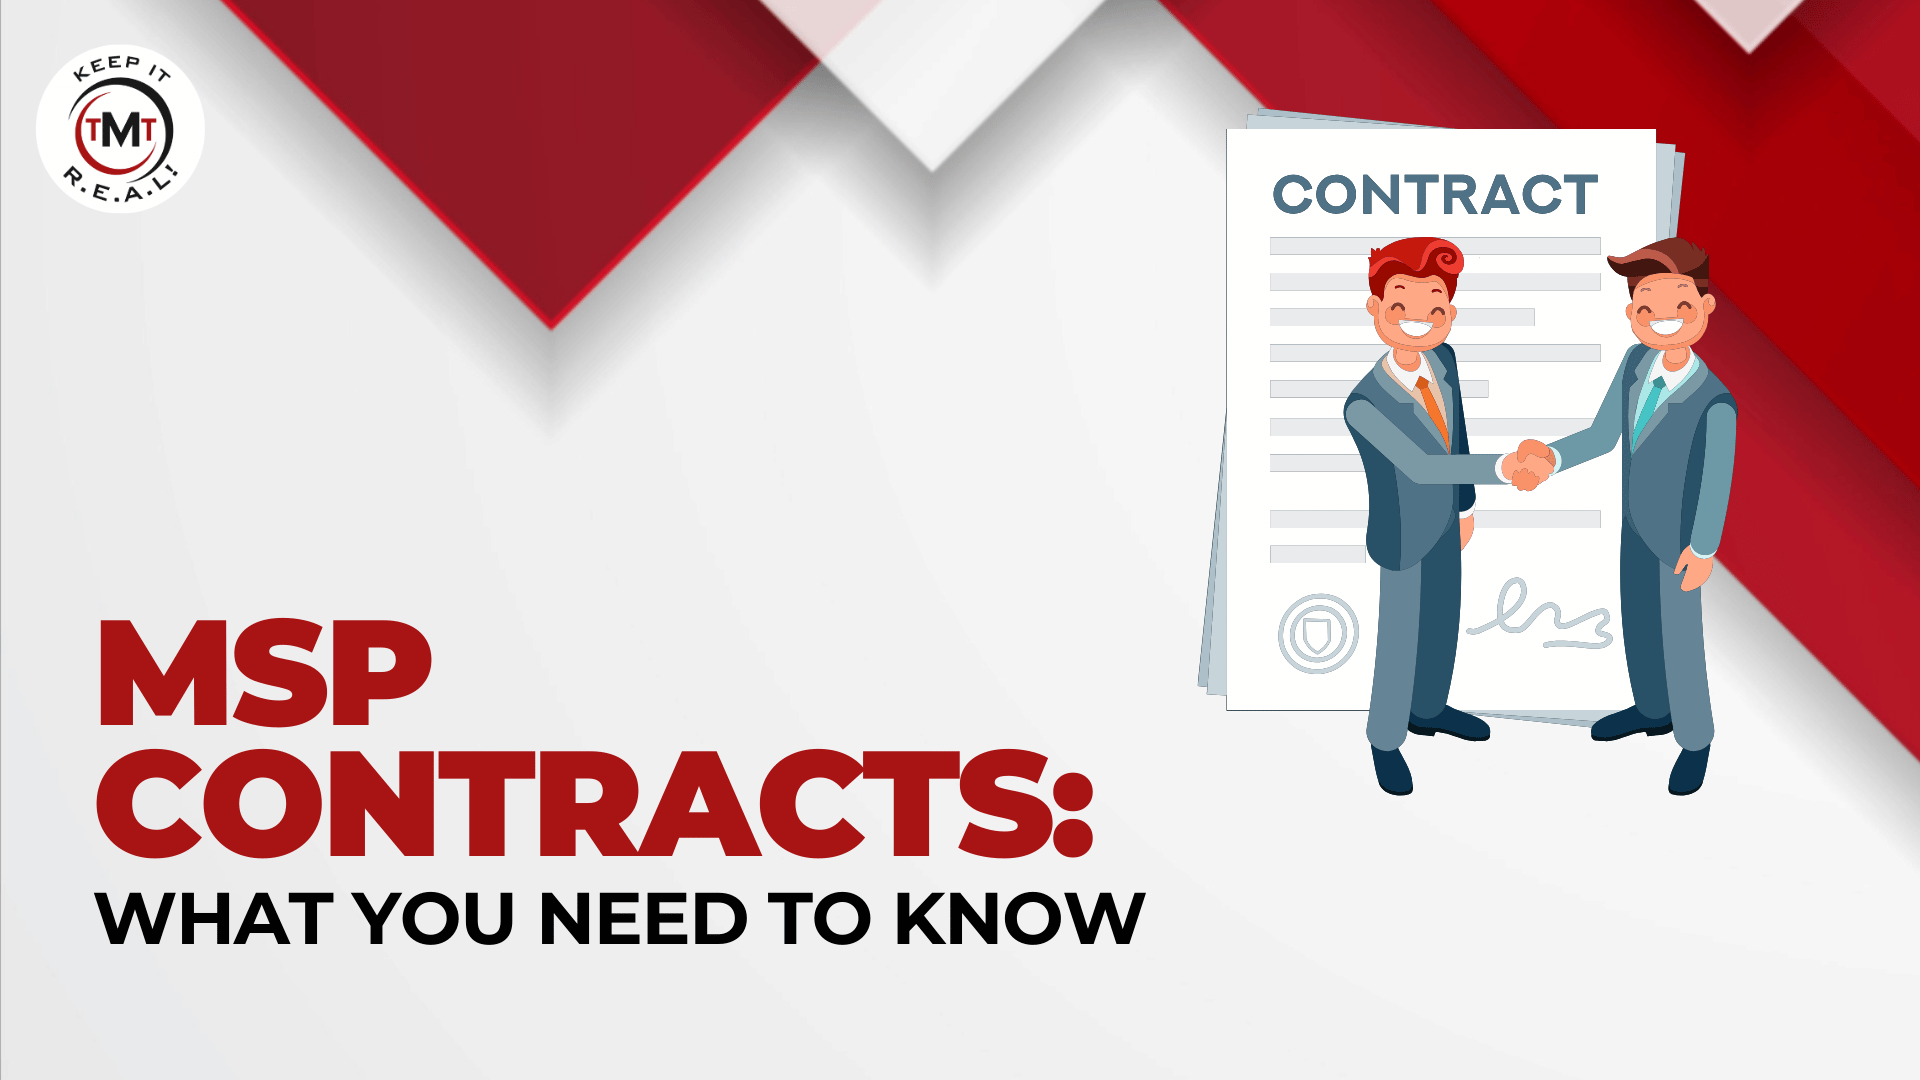 Featured image for “MSP Contracts: What You Need To Know”